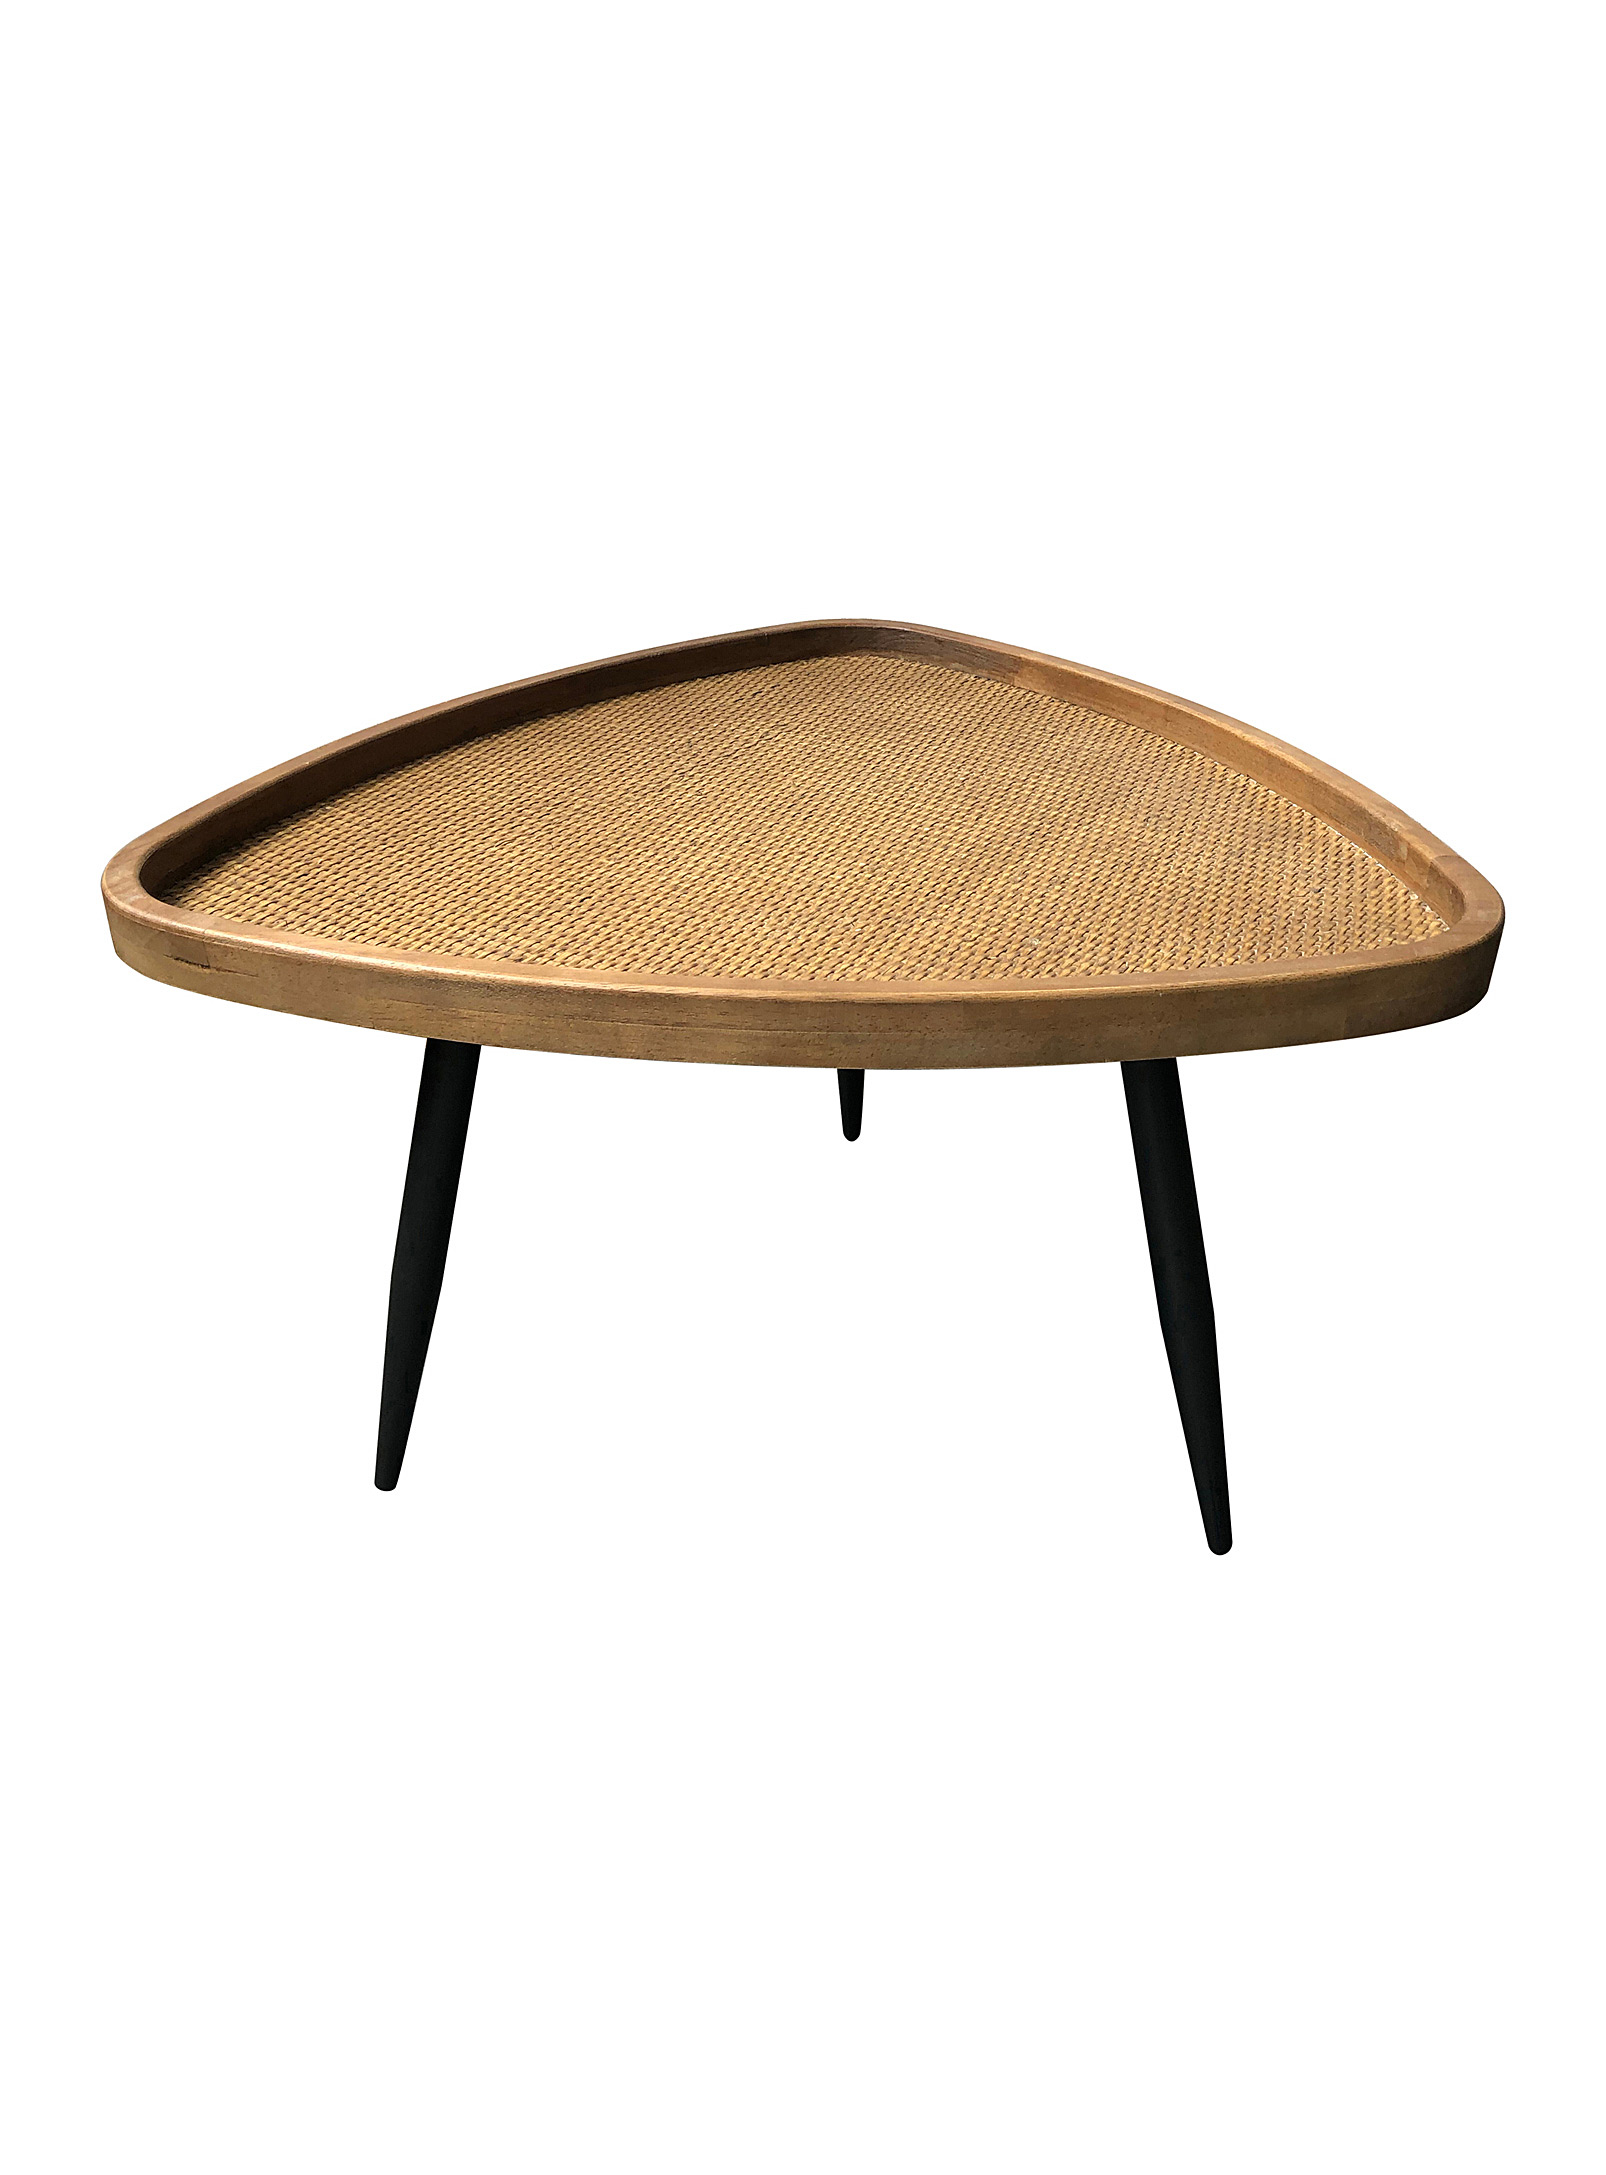 Moe's Home Collection - Rollo rattan coffee table